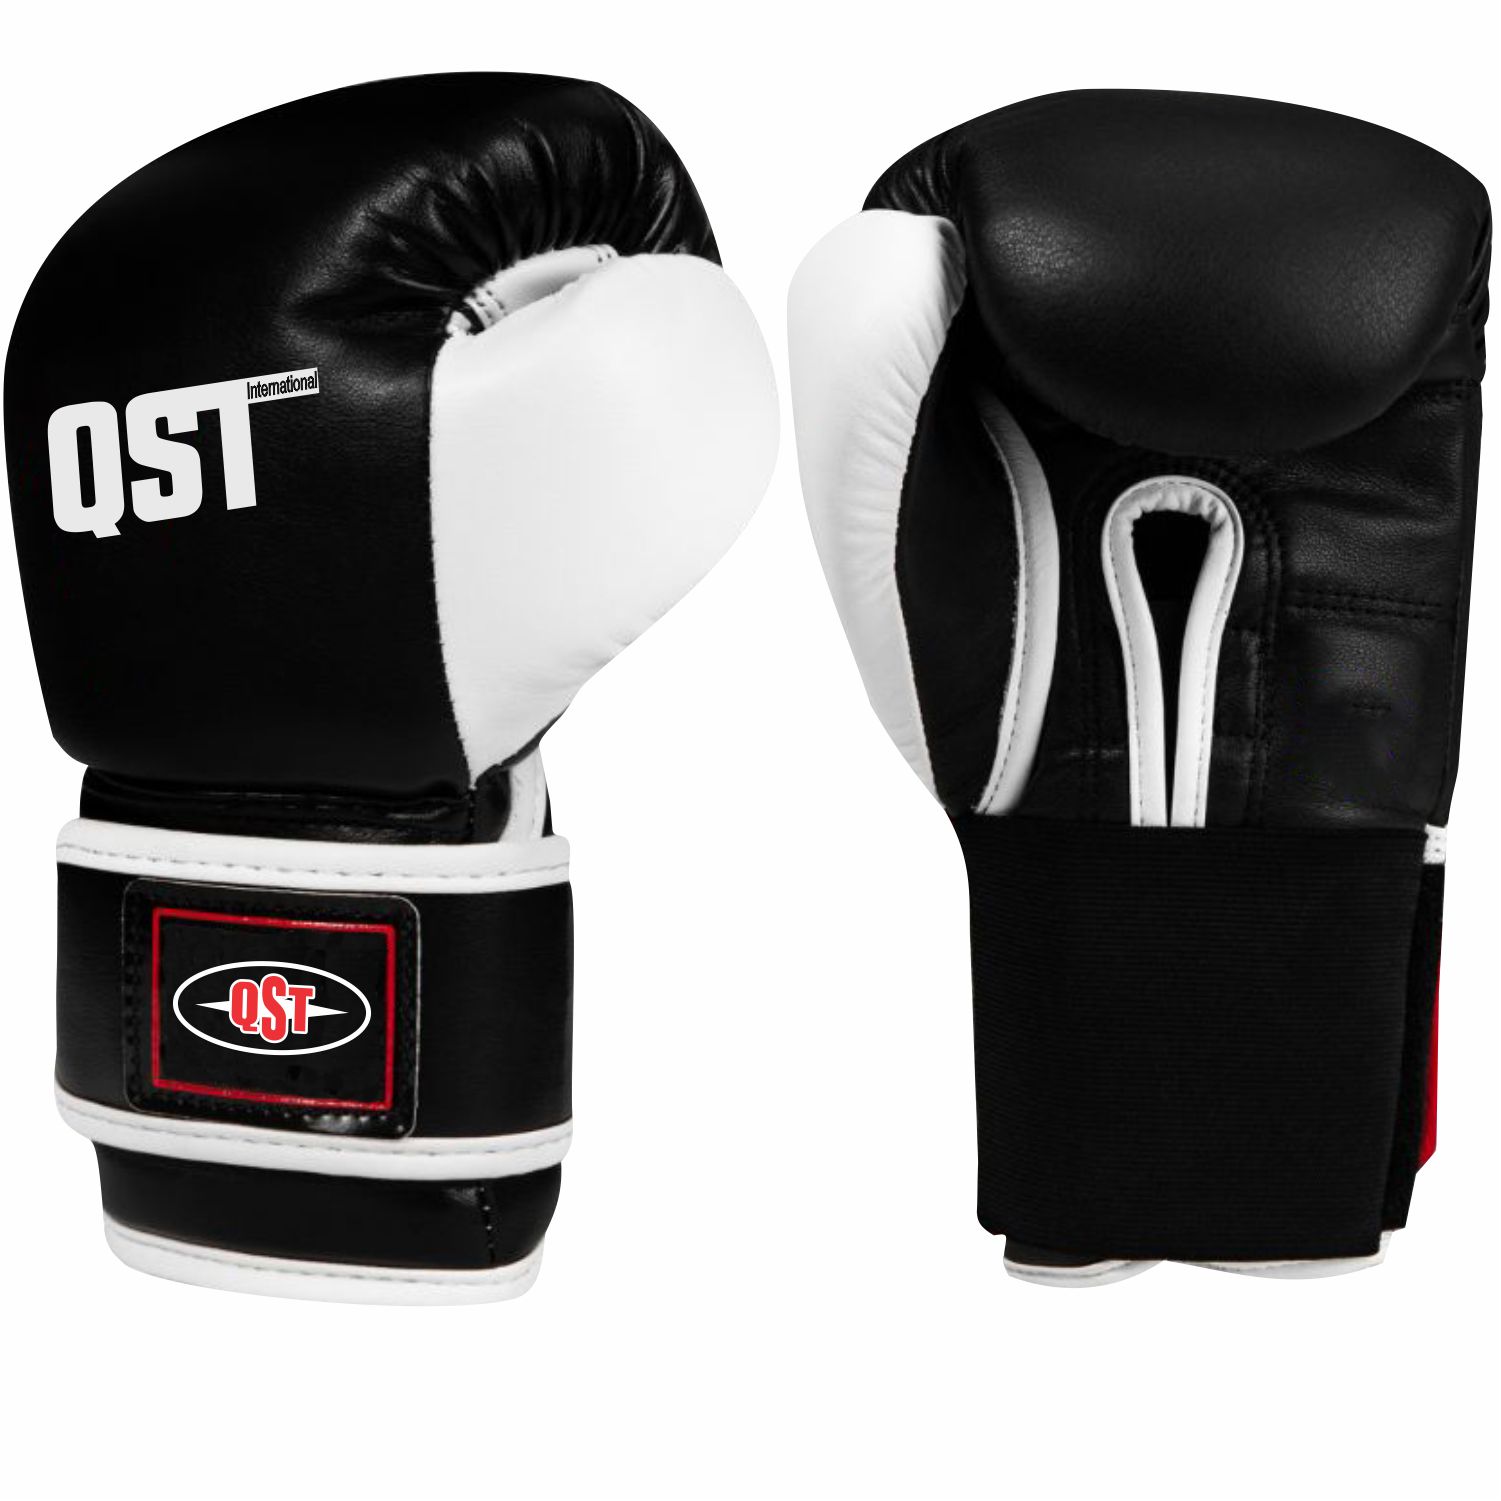 Professional Boxing Gloves - PRG-1523